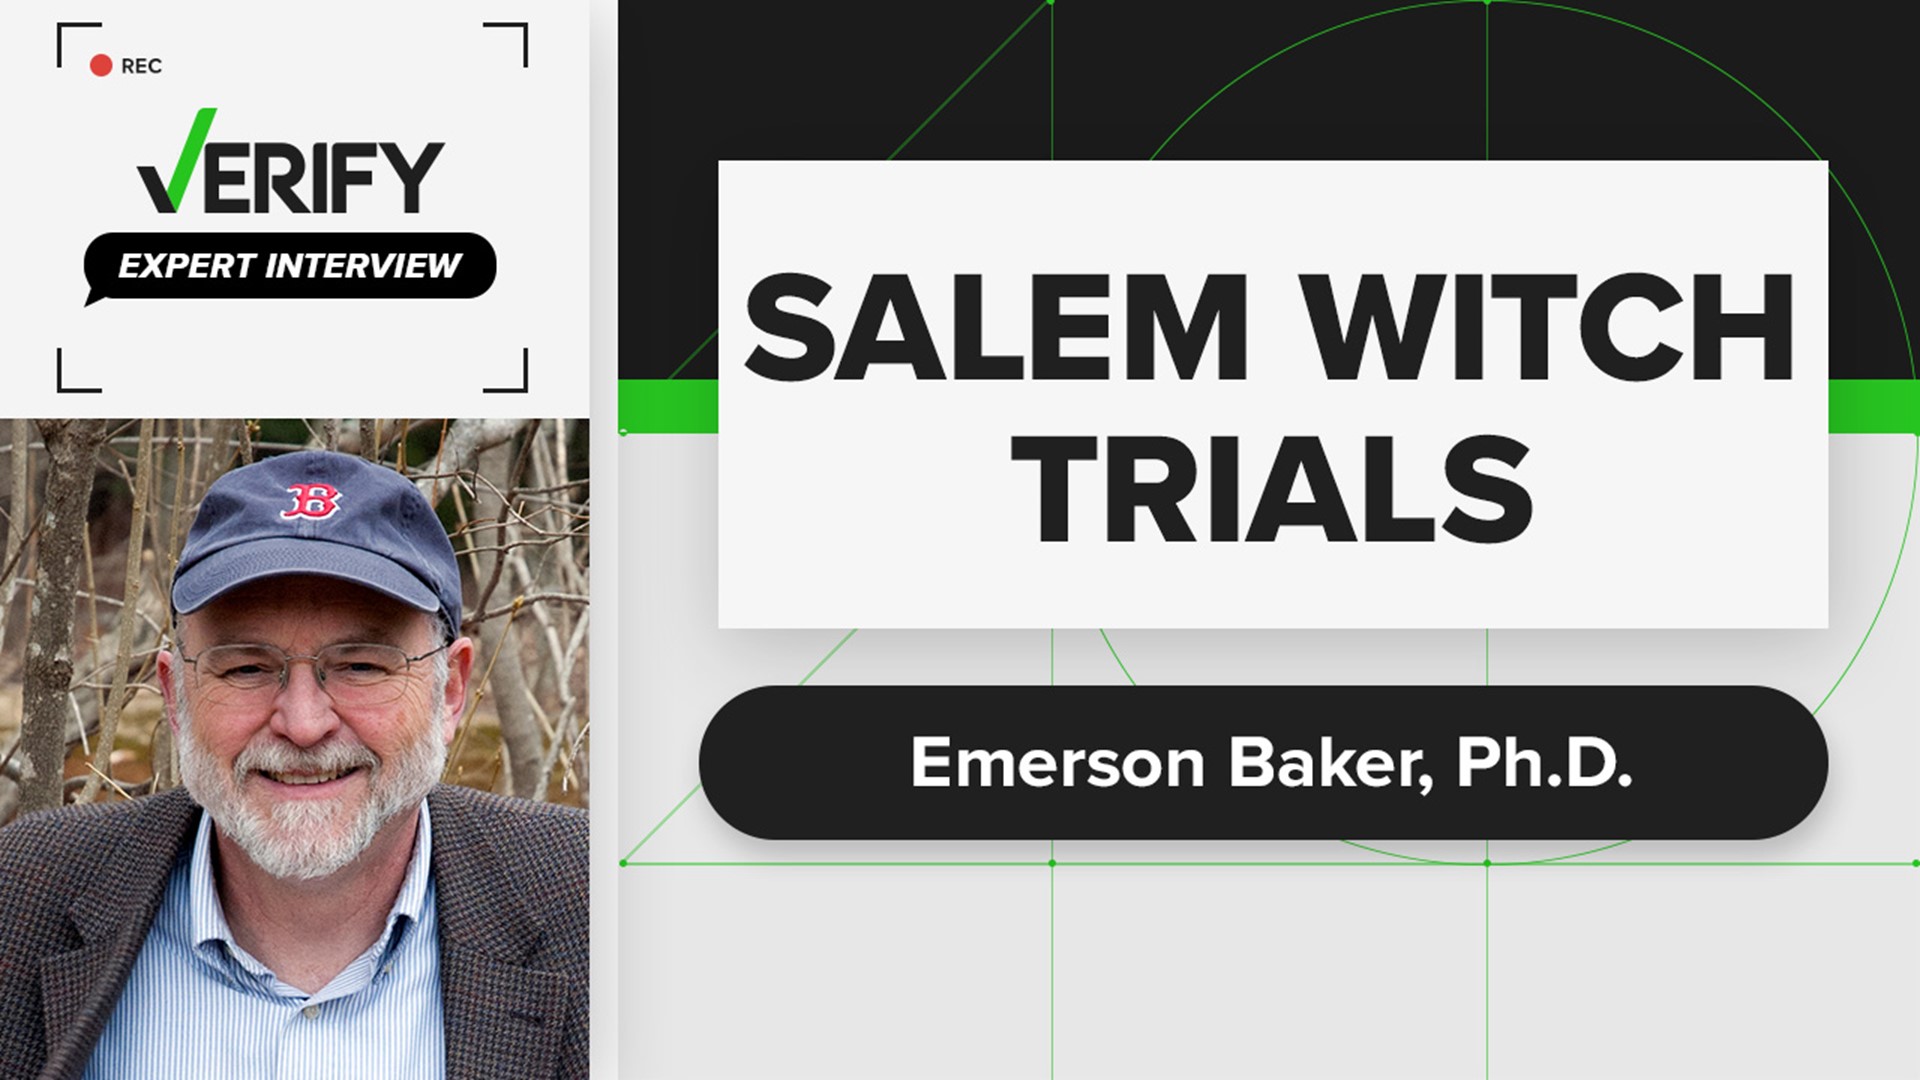 In this expert interview, Emerson Baker delves into the history behind the Salem witch trials and the truth behind the myth of witches being burned at the stake.